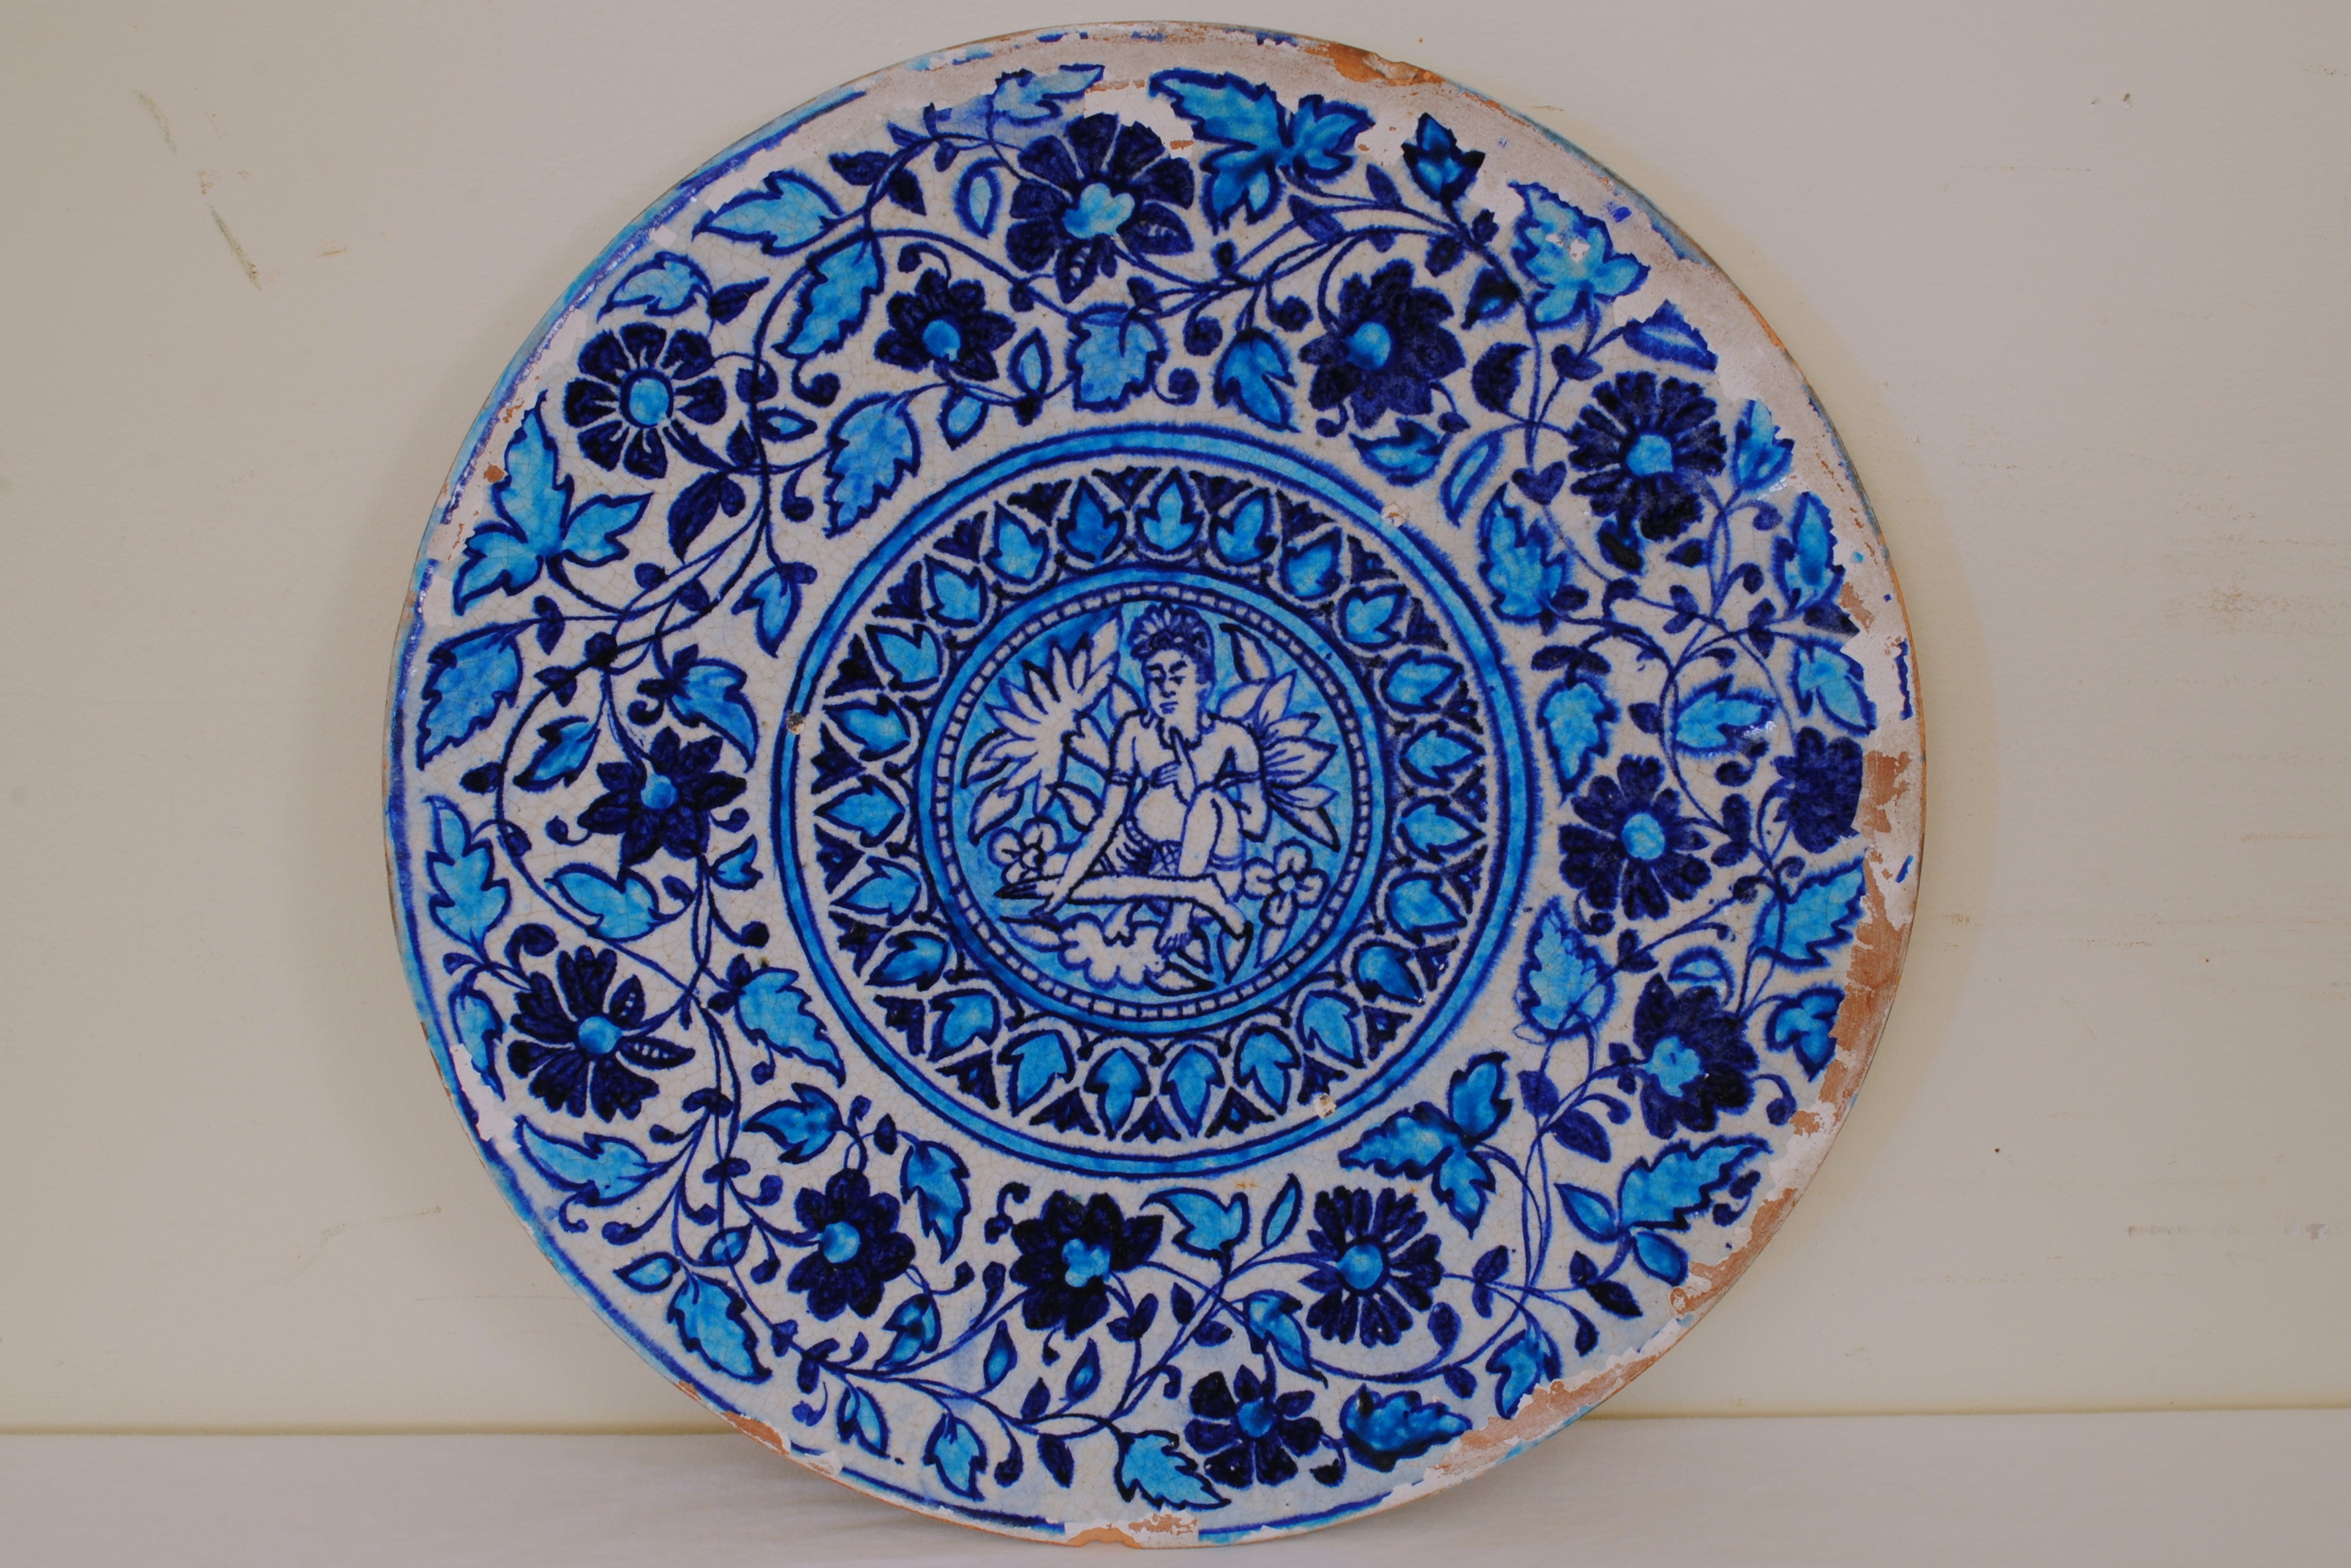 A 1st Half 19th Century Moroccan Painted & Glazed Ceramic Charger